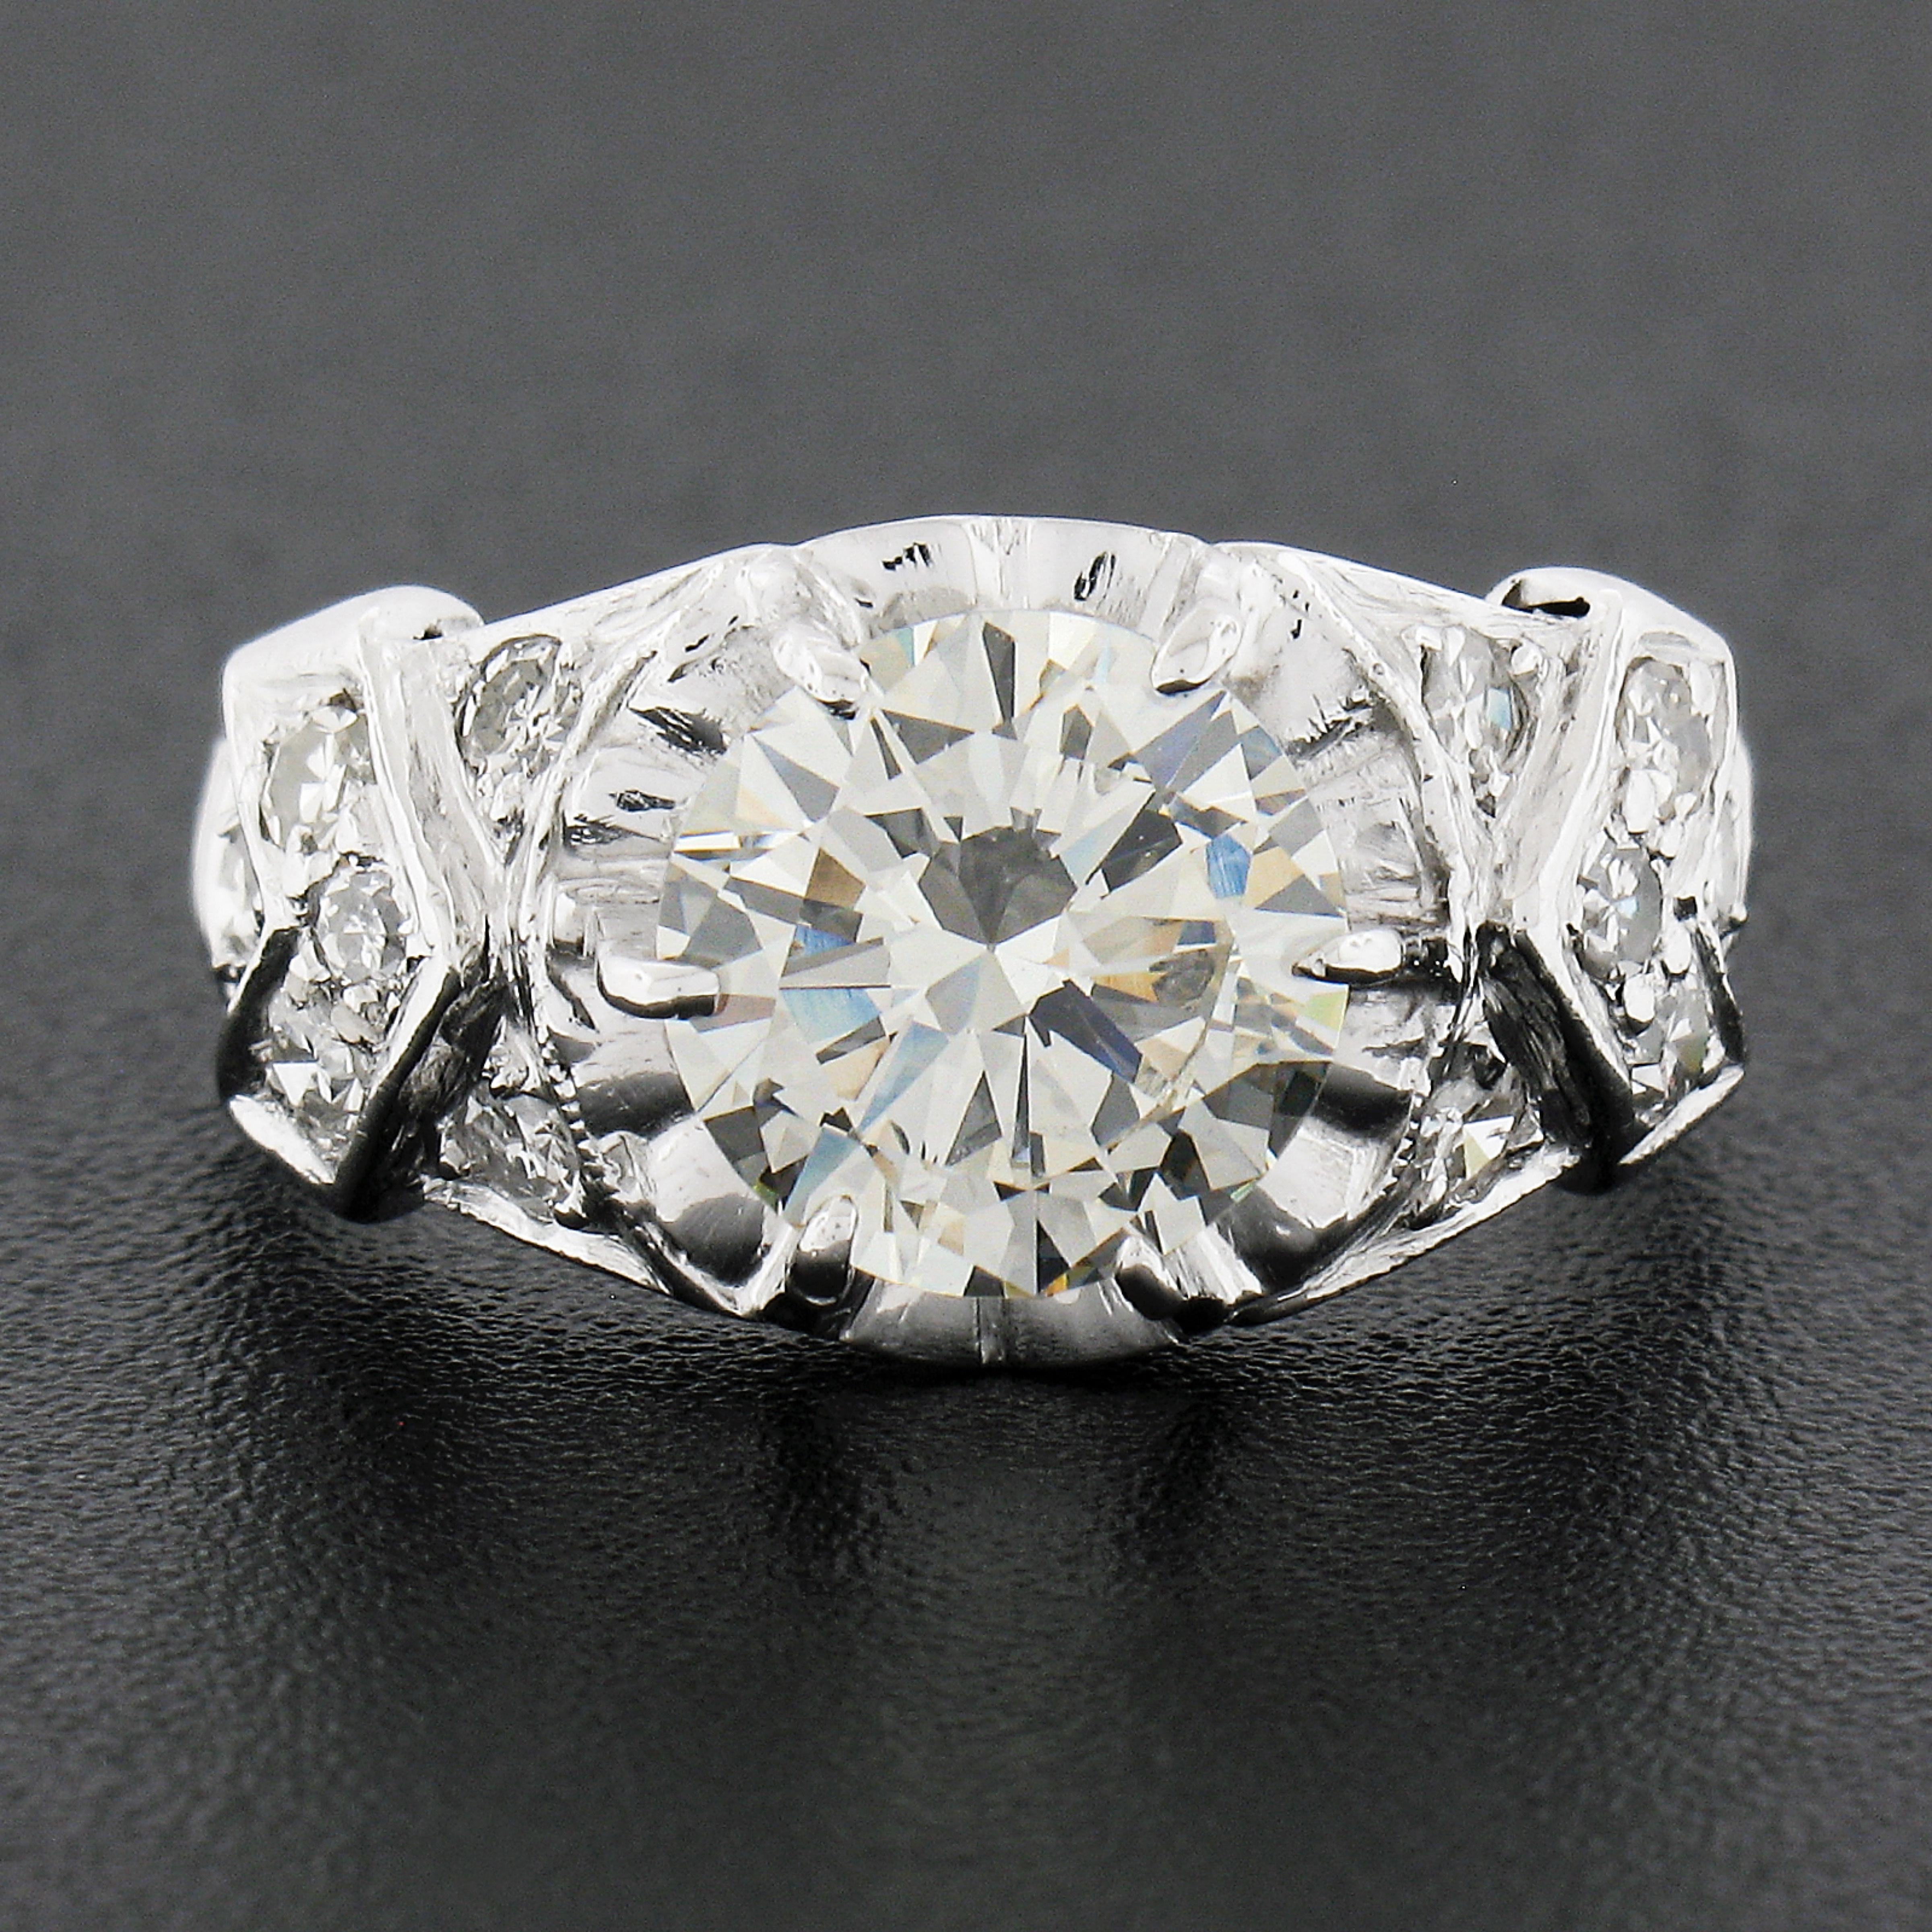 This is an absolutely jaw dropping vintage engagement ring that was crafted from solid platinum during the 1940's. It features a GIA certified, round brilliant cut, diamond neatly set at the center in a buttercup prong basket setting weighing